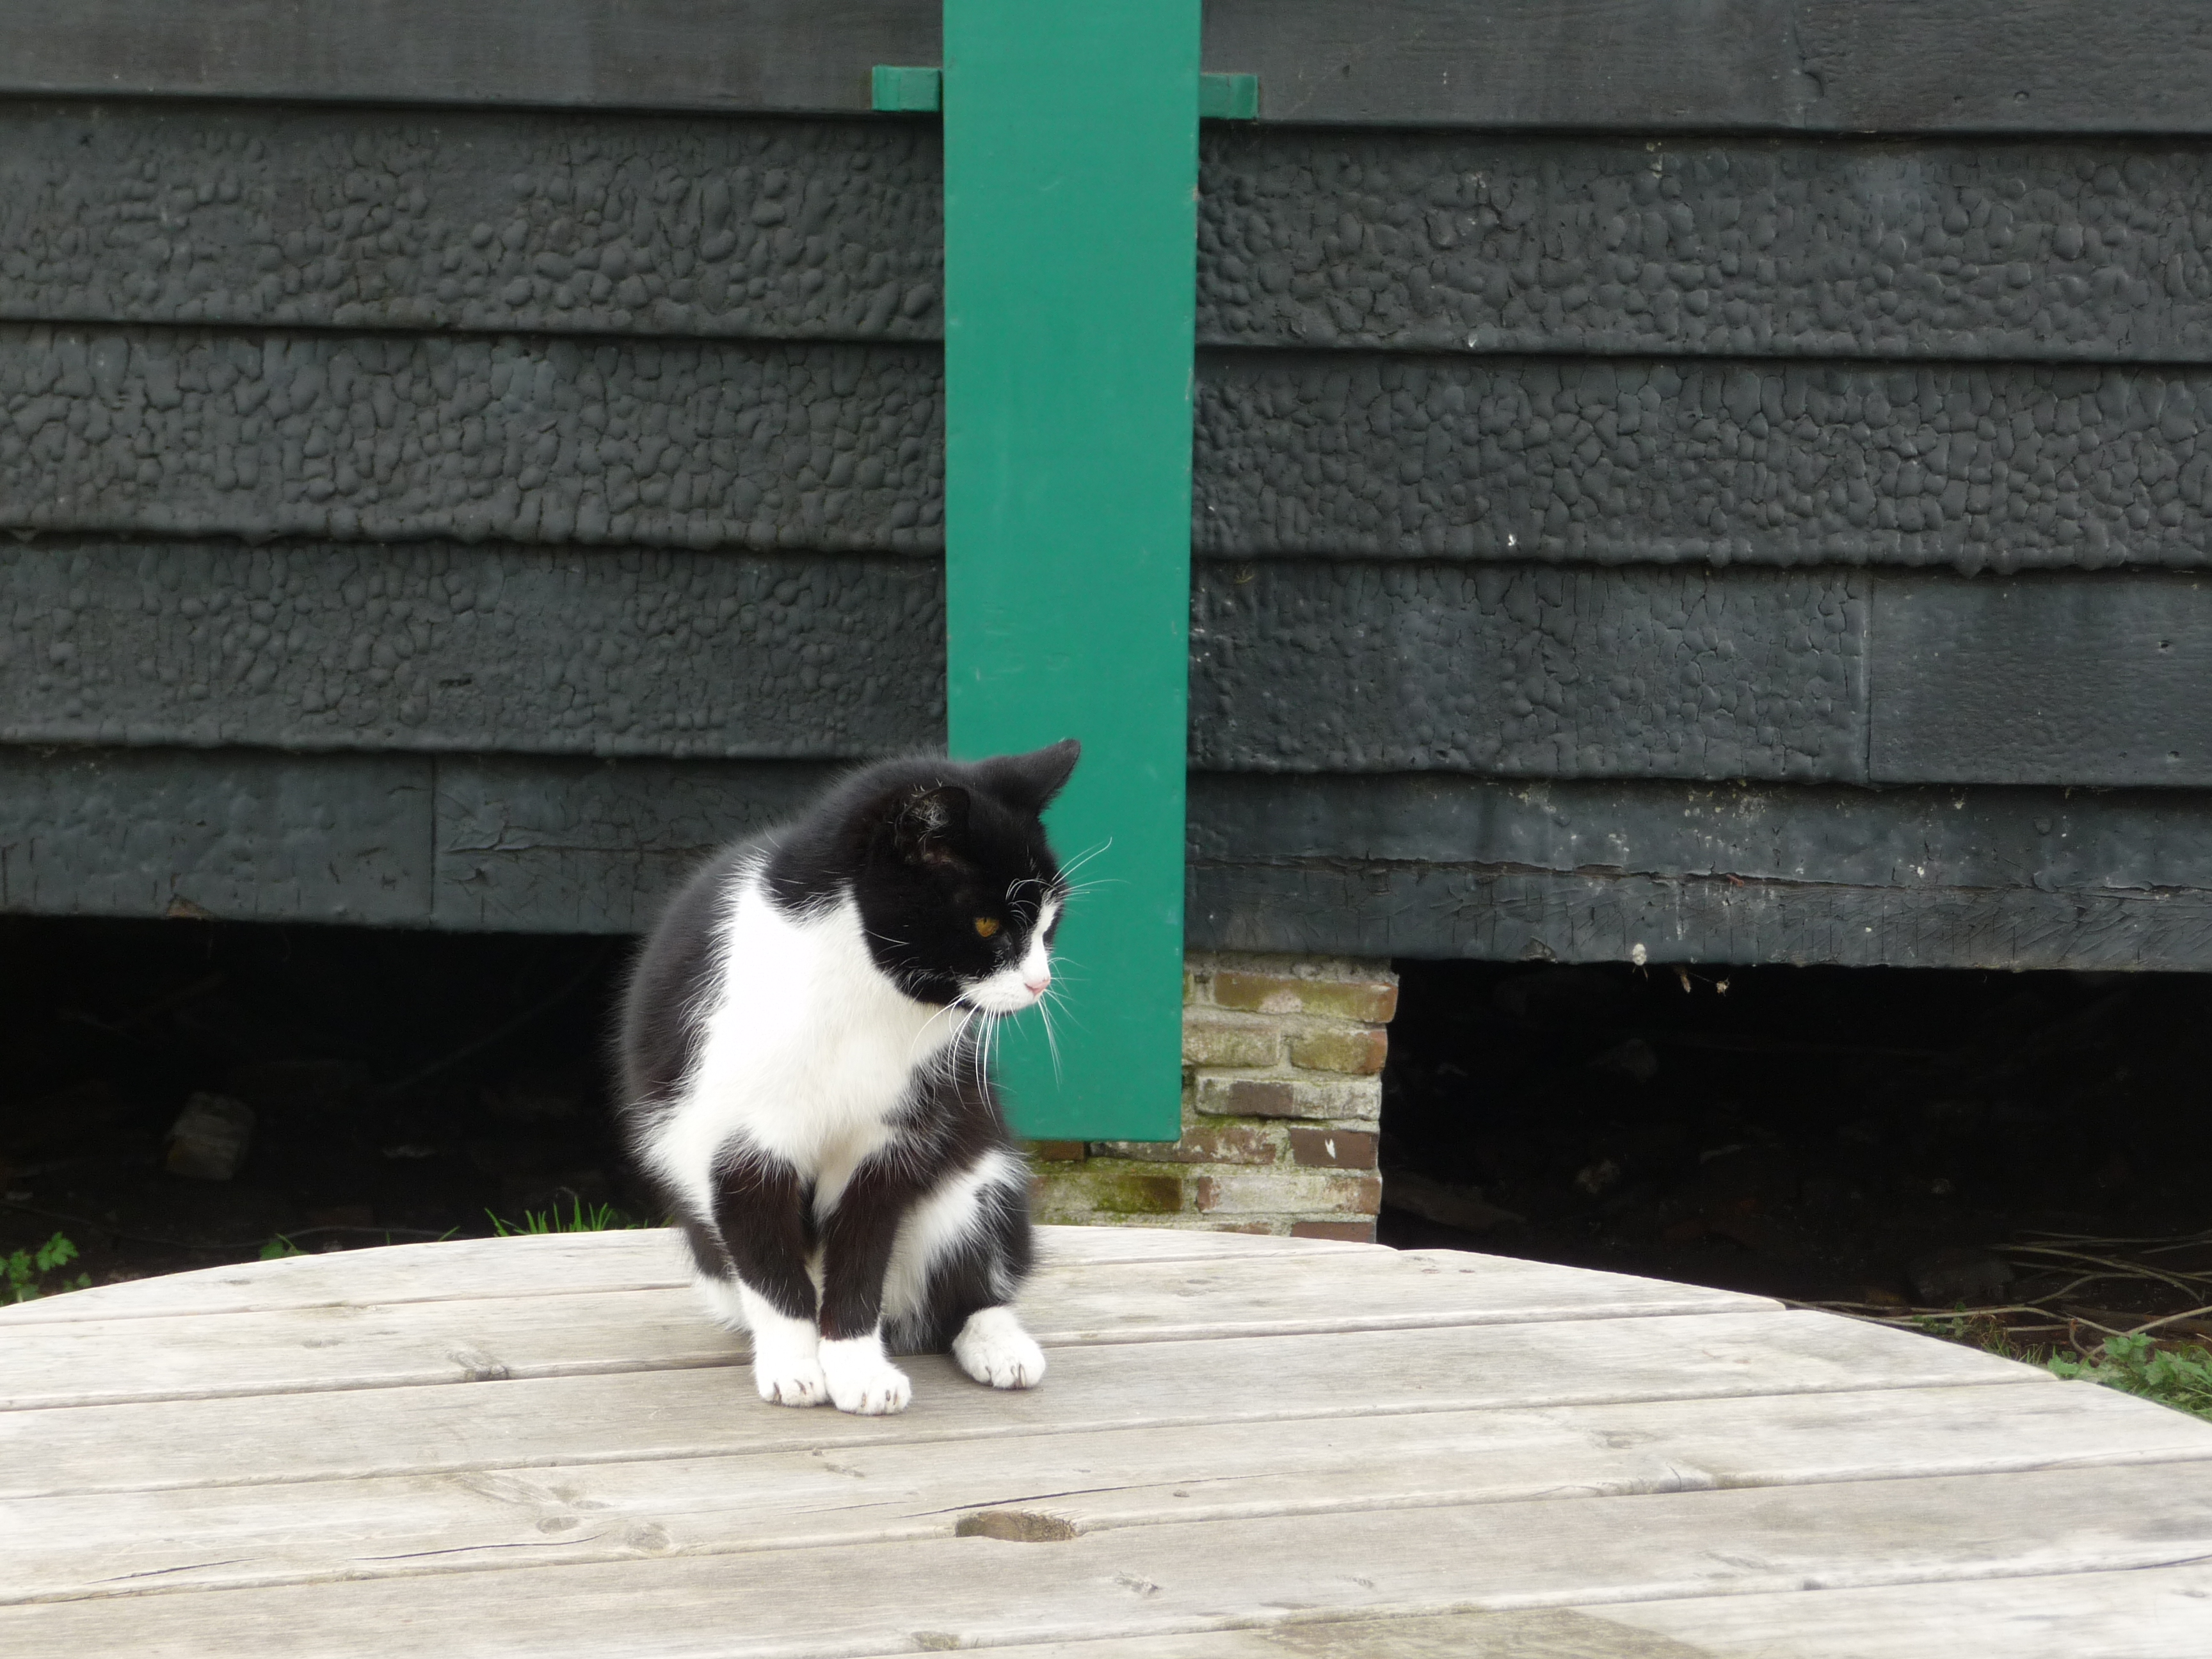 The Cat at “The Cat” Windmill